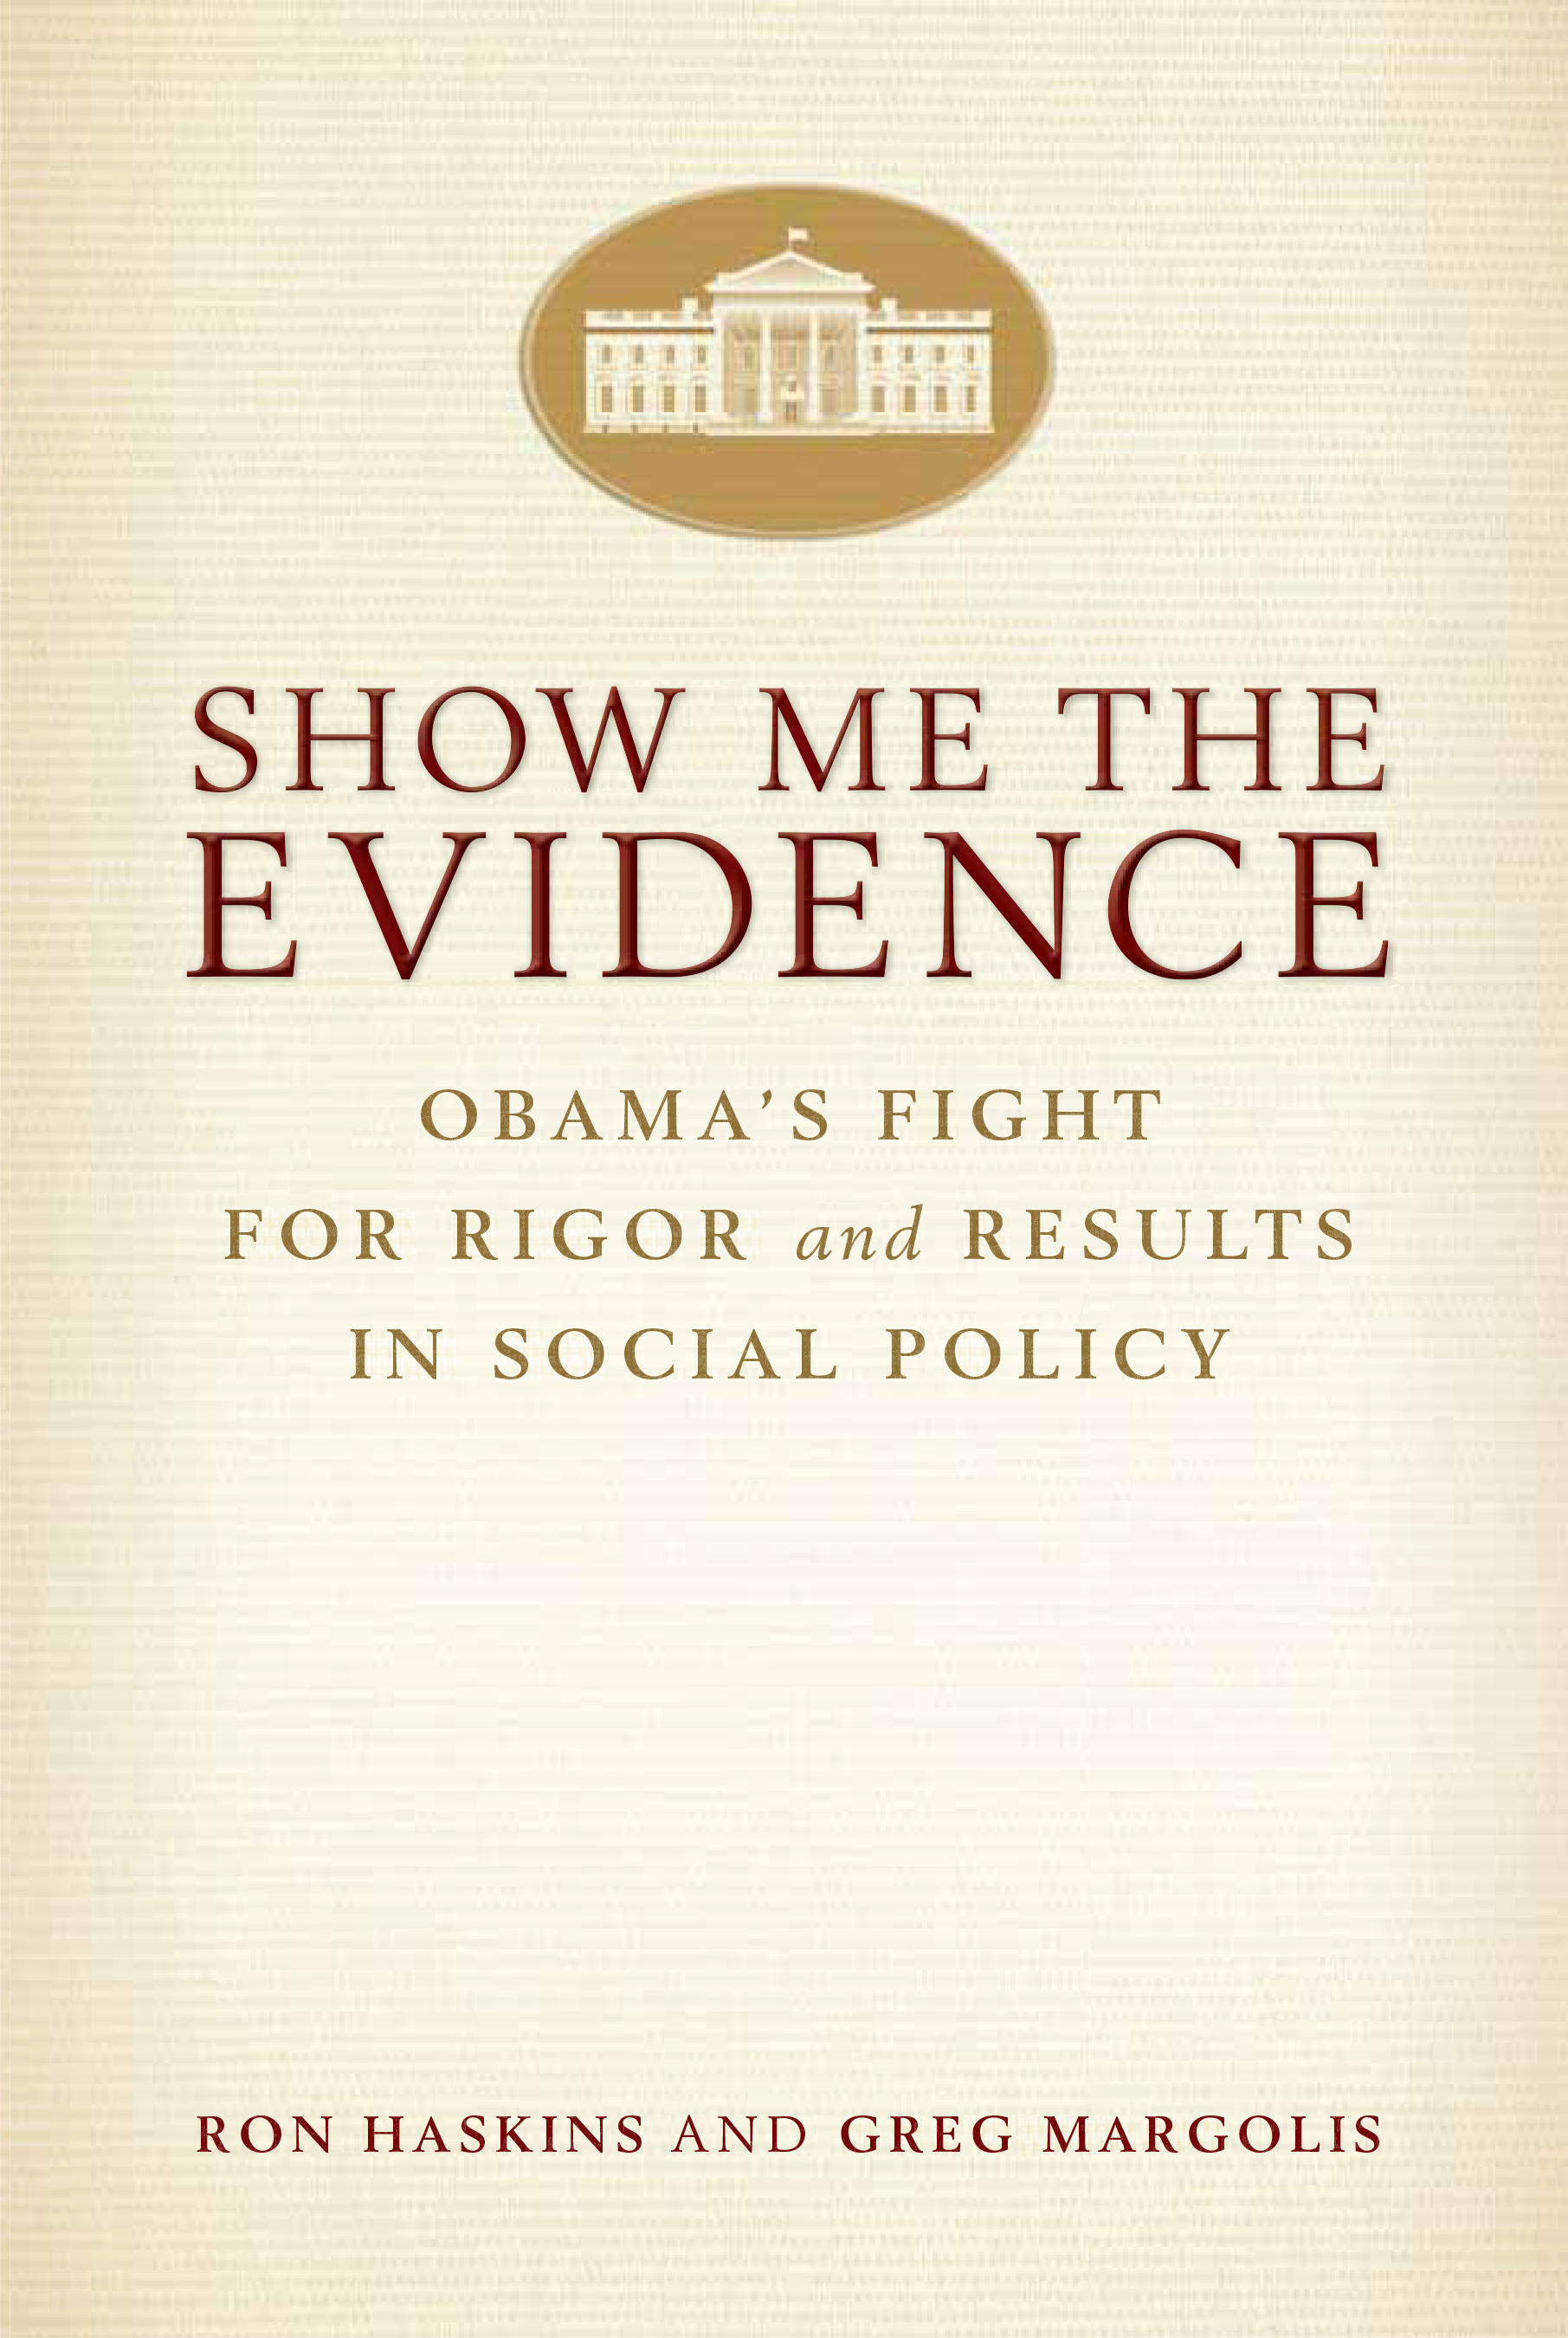 Show Me the Evidence: Obama's Fight for Rigor and Results in Social Policy